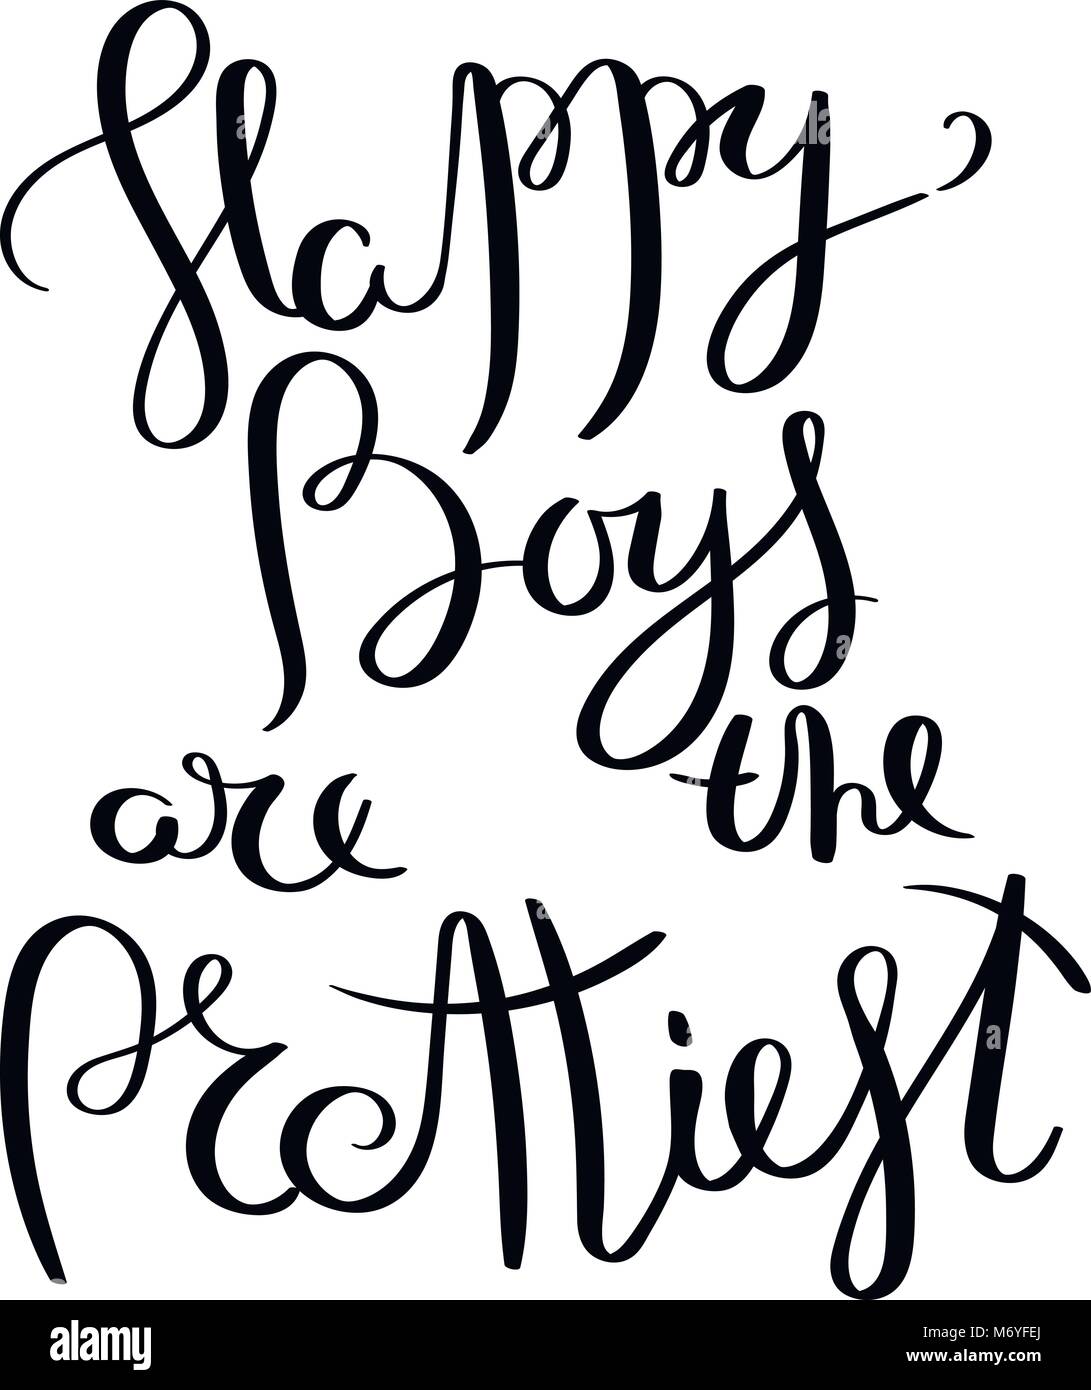 Happy boys are the prettiest. Hand written calligraphy quote motivation for life and happiness. For postcard, poster, prints, cards graphic design. Stock Vector